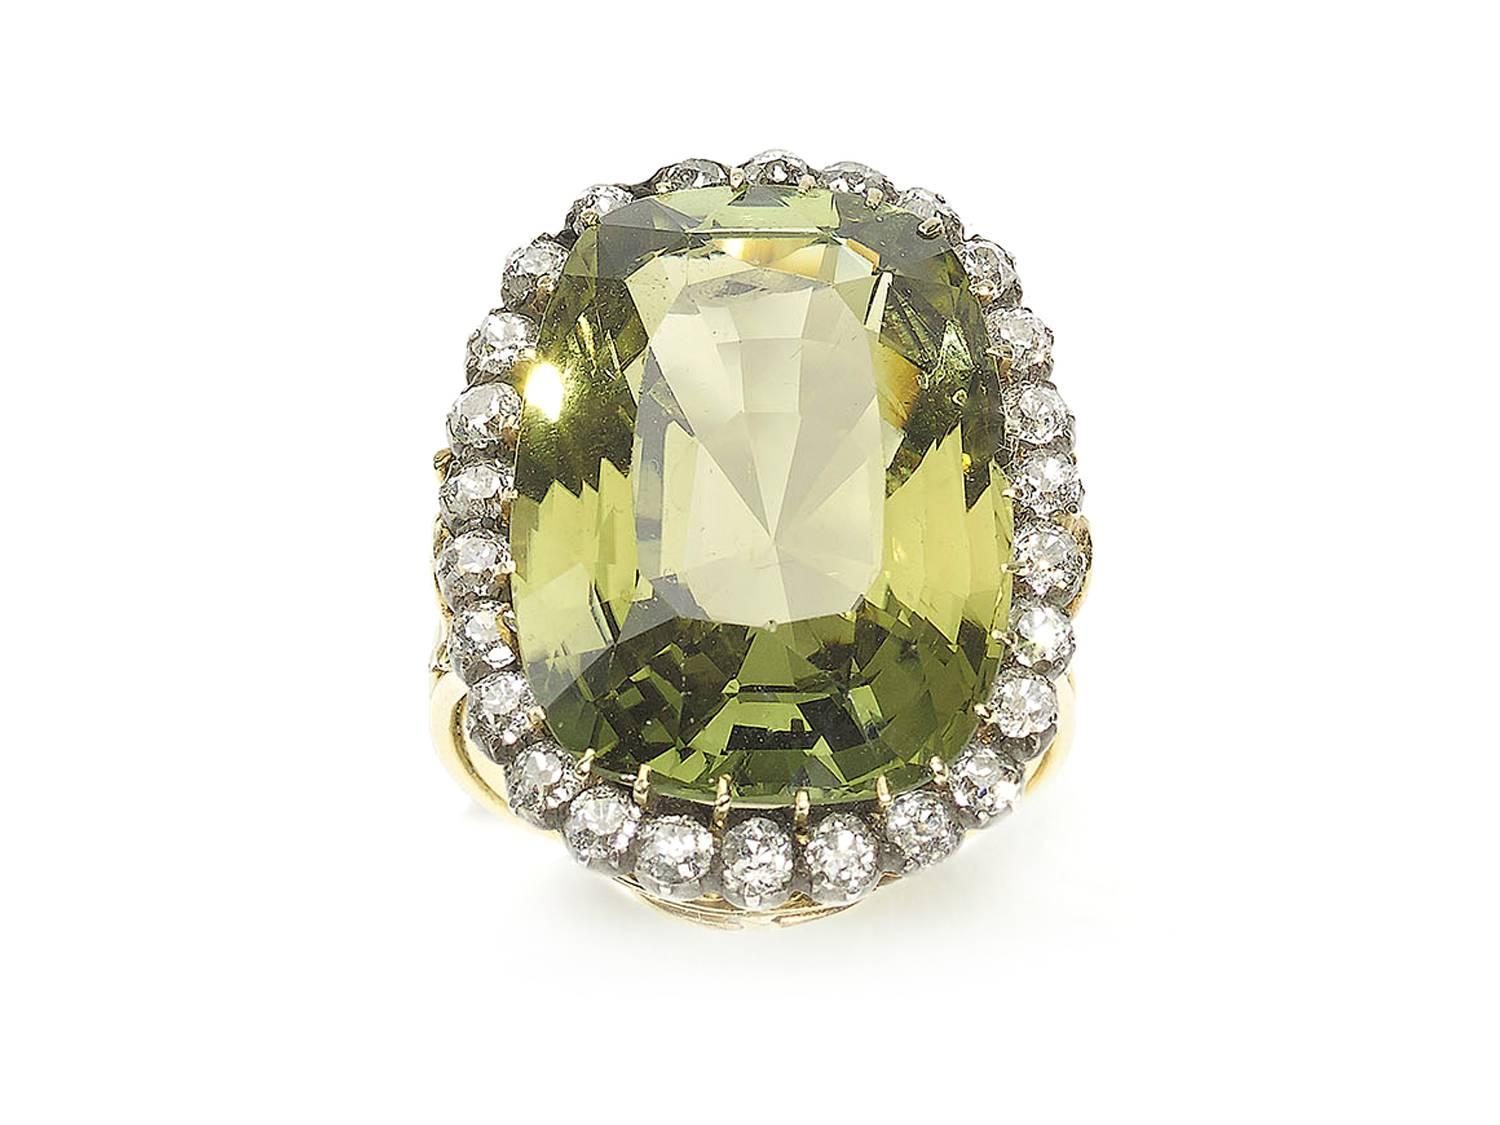 A chrysoberyl and diamond ring, central oval chrysoberyl weighing an estimated 25.45ct, surrounded by old cut diamonds weighing an estimated total of 1.30ct, mounted in yellow gold. Finger Size UK K / US 5⅛